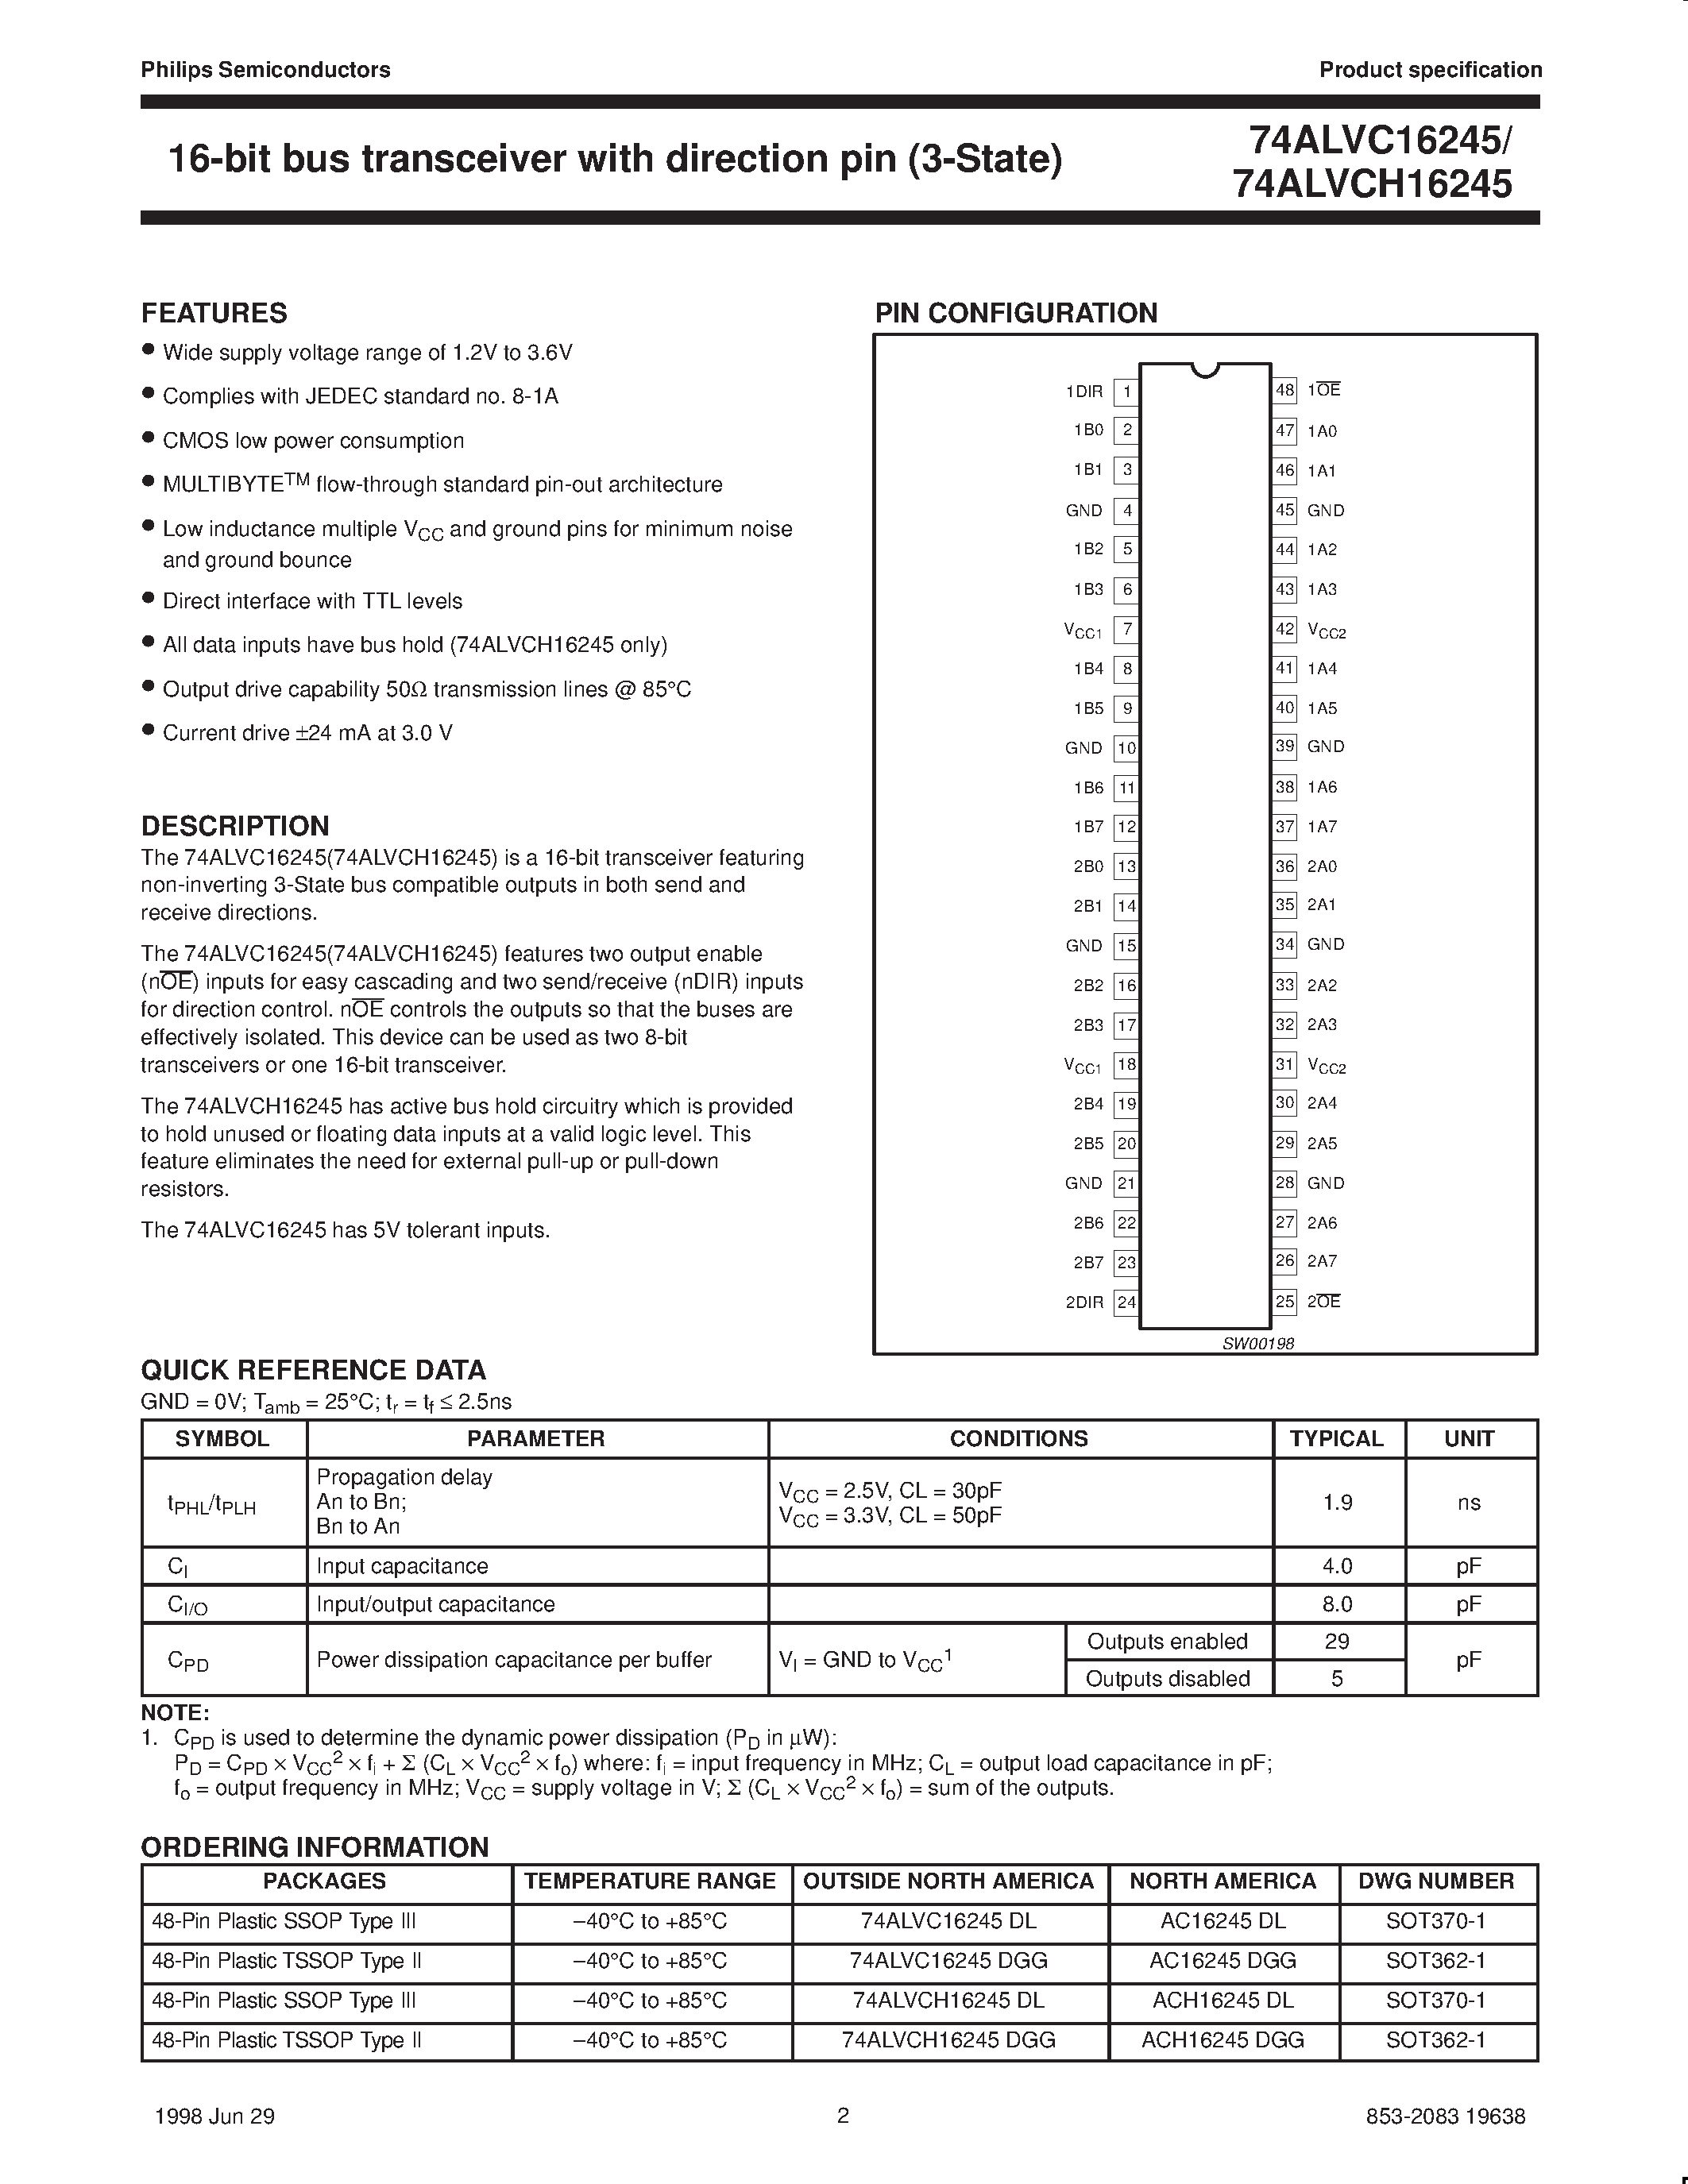 Datasheet 74ALVCH16245DGG - 2.5V/3.3V 16-bit bus transceiver with direction pin 3-State page 2